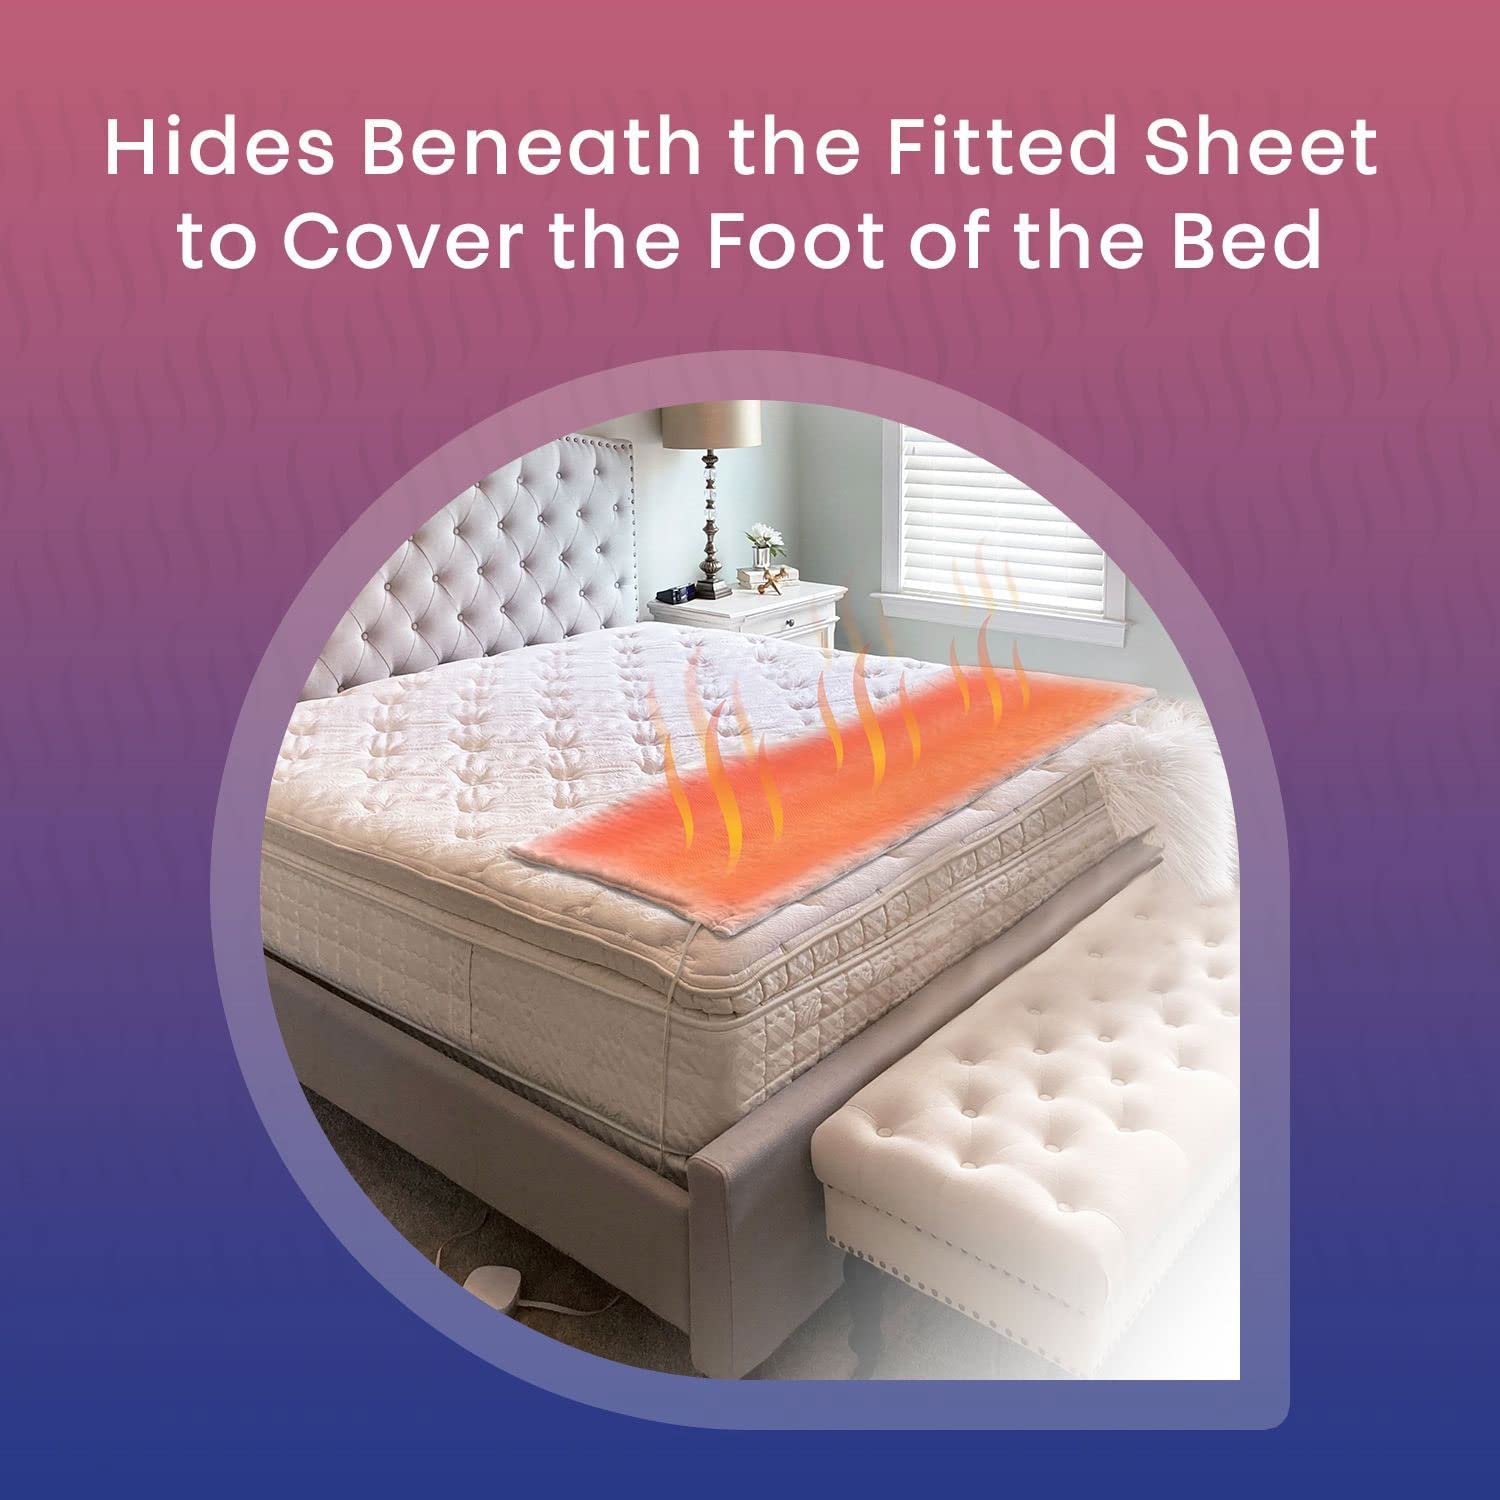 Hidden Heat Electric Foot of The Bed Warmer by Spotwarm; Wireless RF Remote, Microplush Flannel Mattress Warmer for Heated Feet. King Bed - 74” by 28”